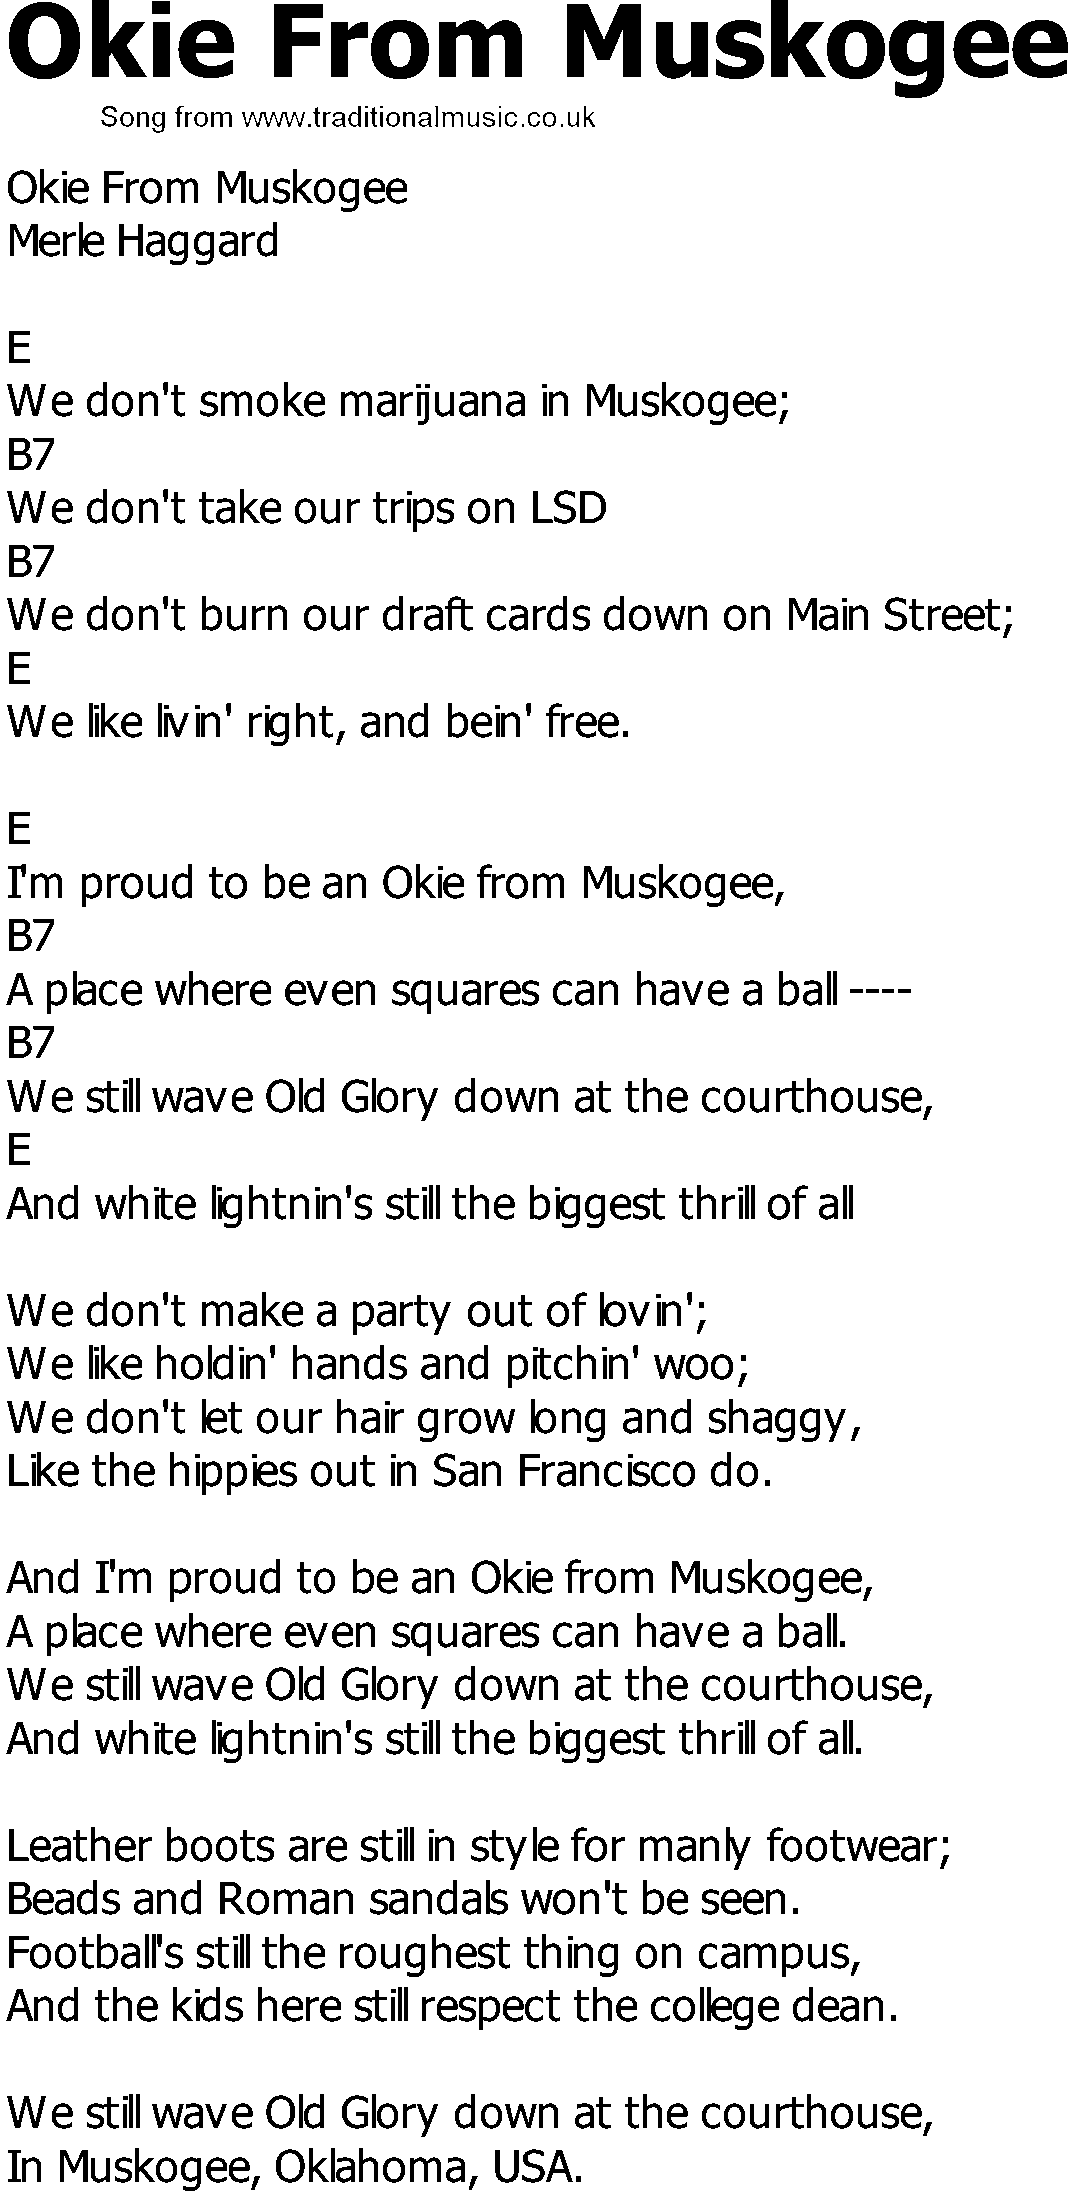 Old Country song lyrics with chords - Okie From Muskogee